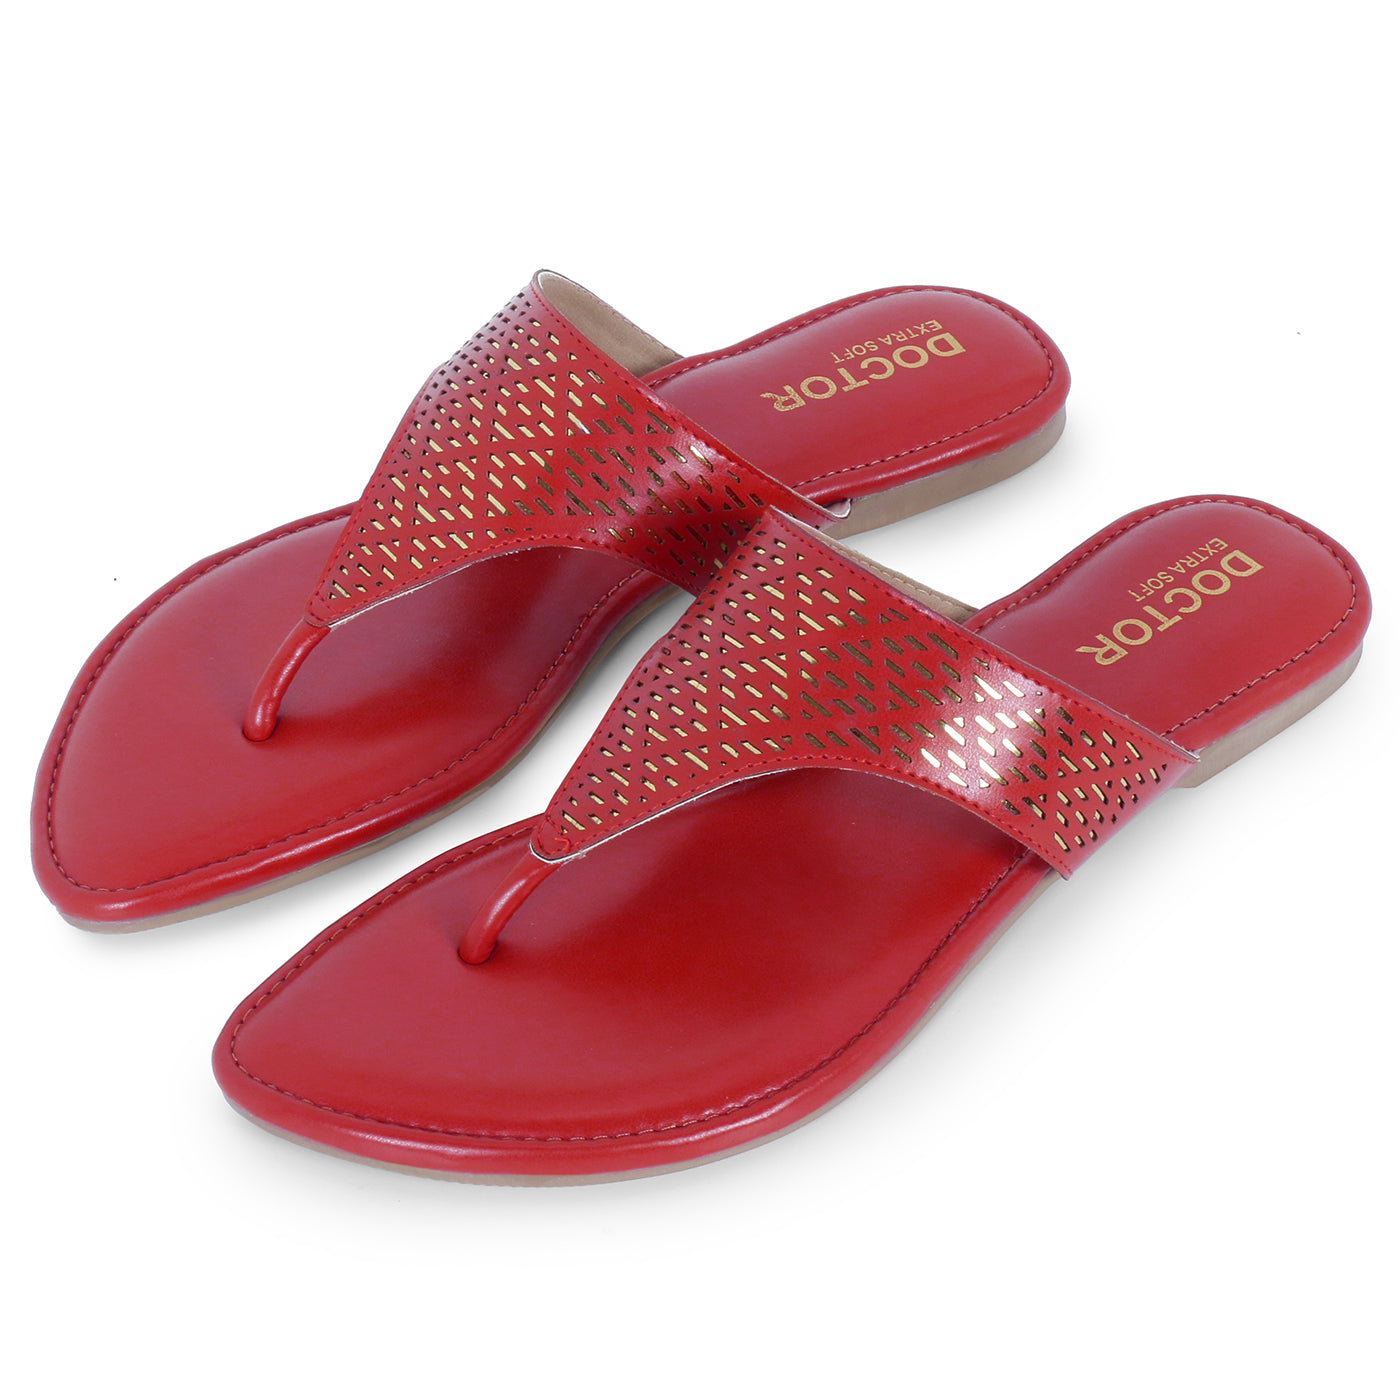 DOCTOR EXTRA SOFT D-651 Chappal Ortho Care Orthopaedic and Diabetic Comfort Doctor Flip-Flop and House Slipper's for Women's